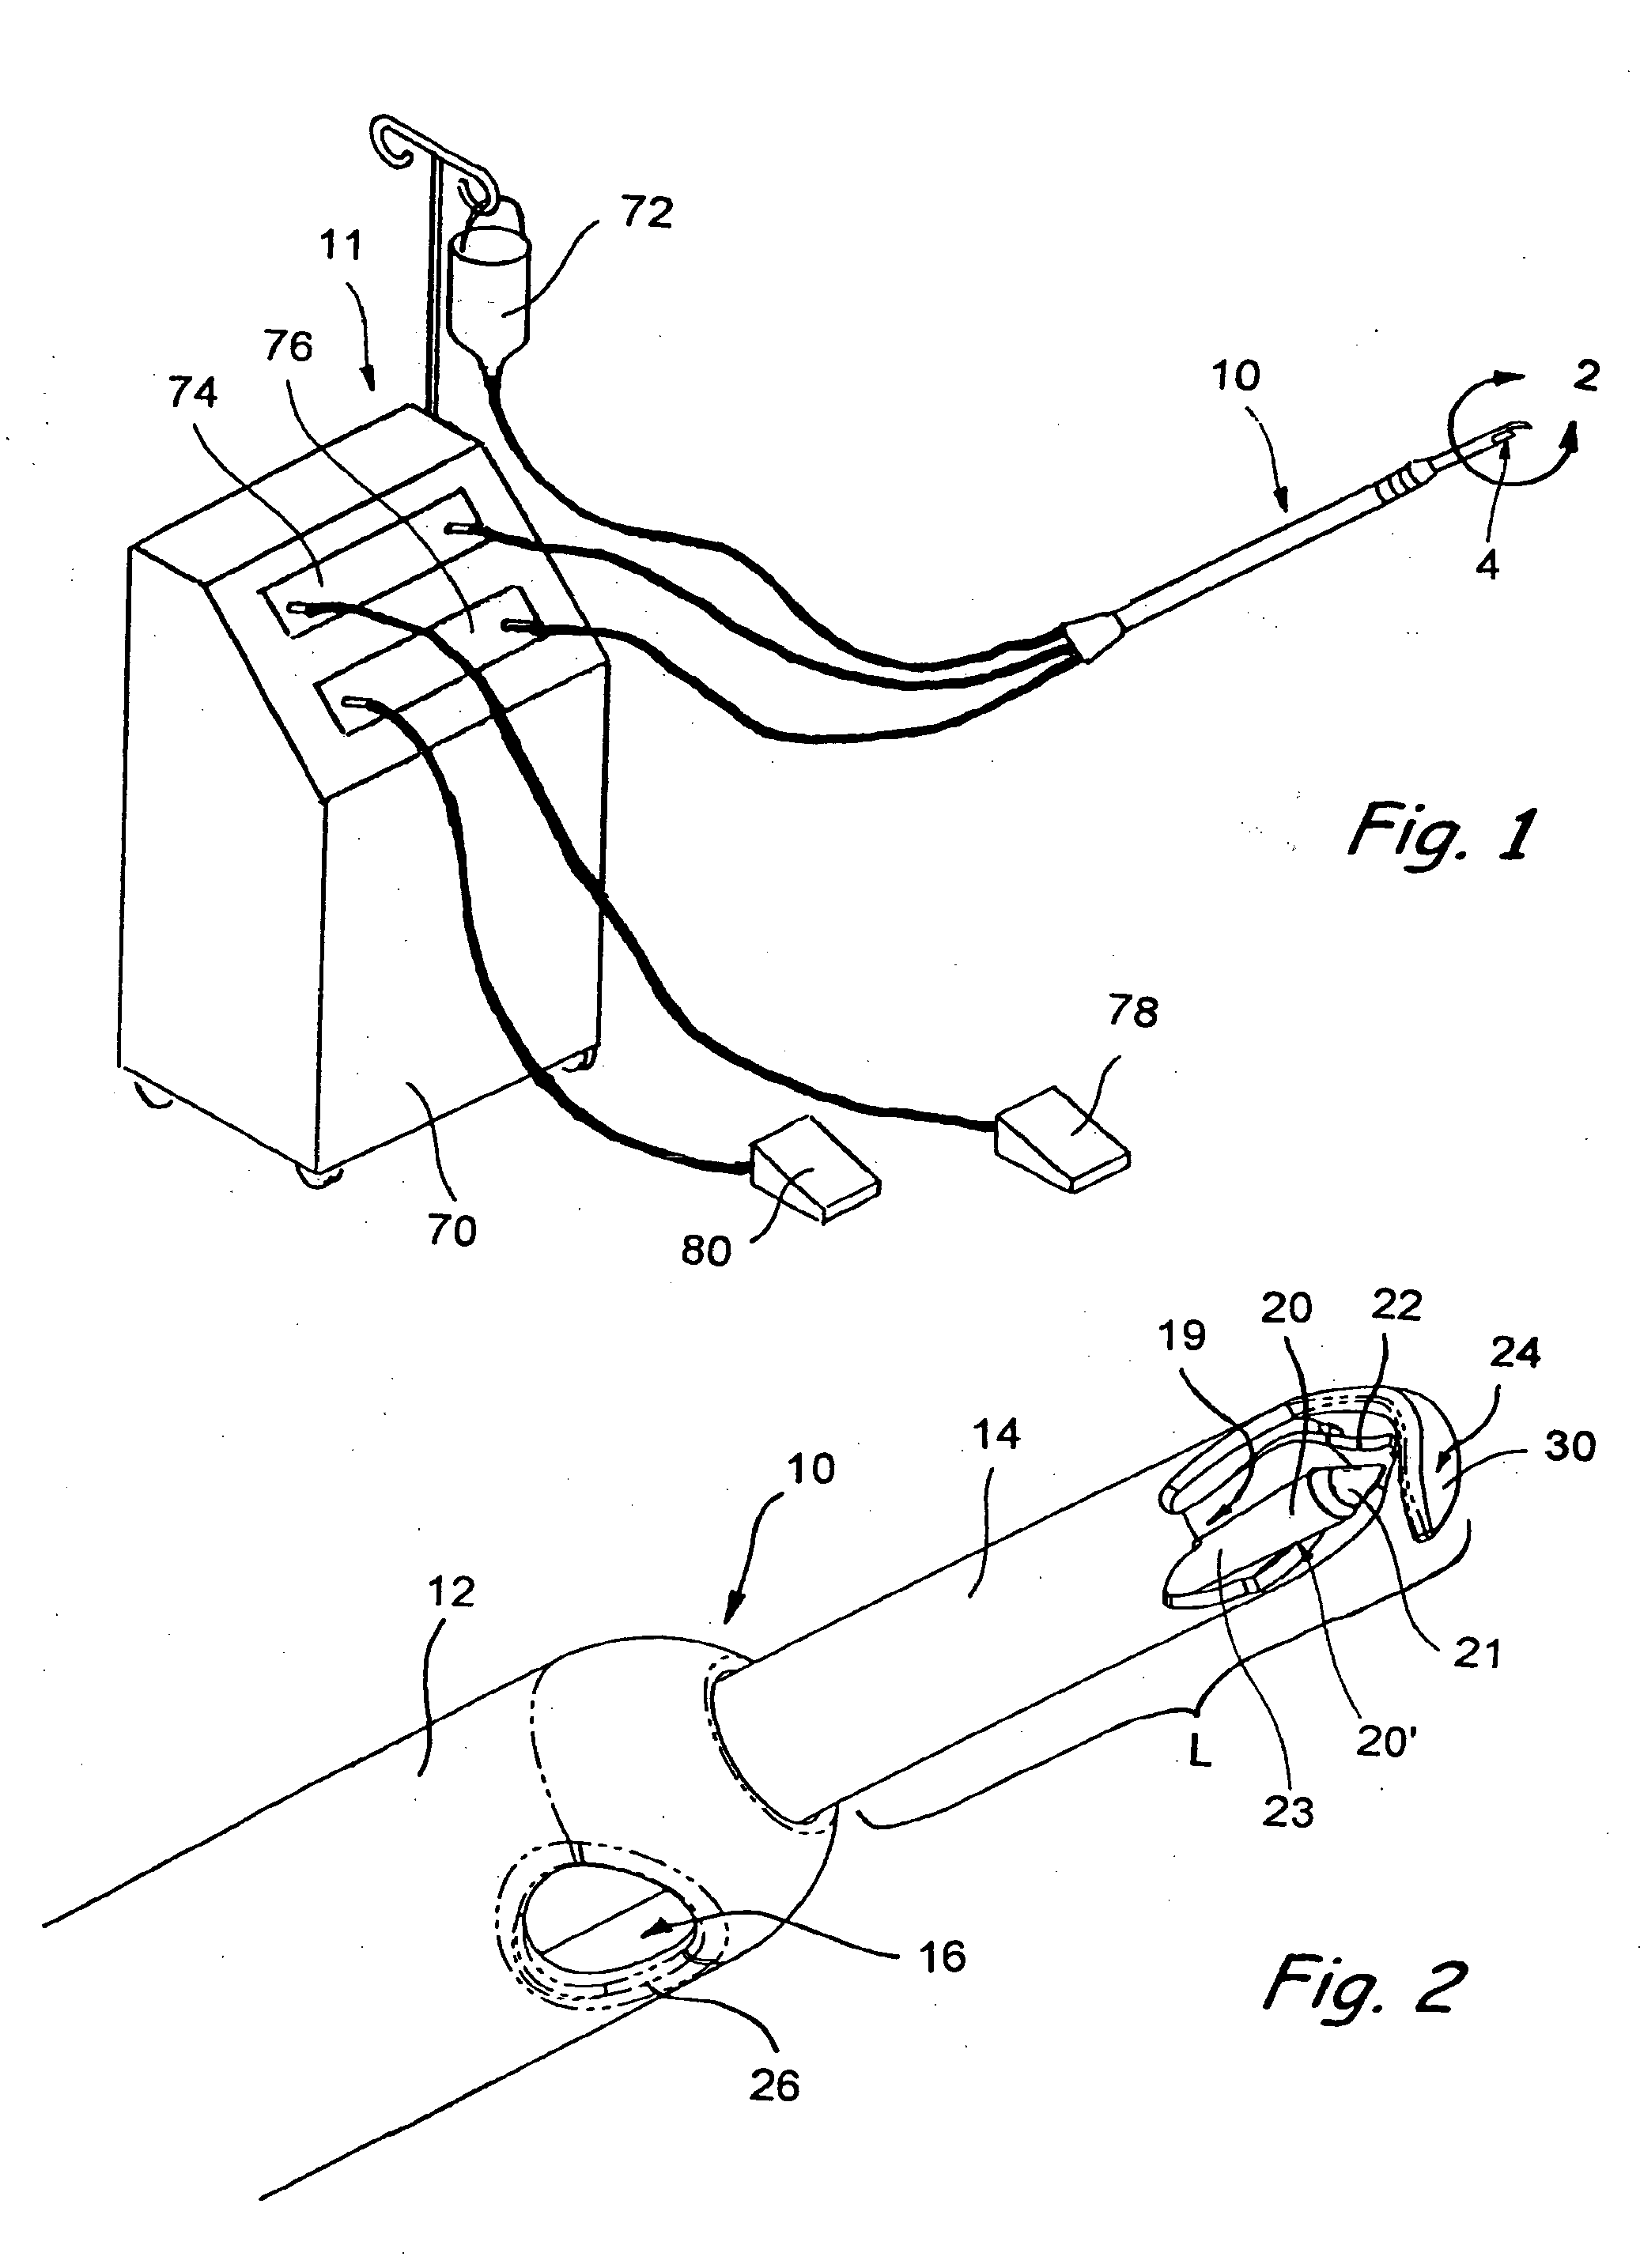 Devices and Methods Useable for Treatment of Glaucoma and Other Surgical Prcedures